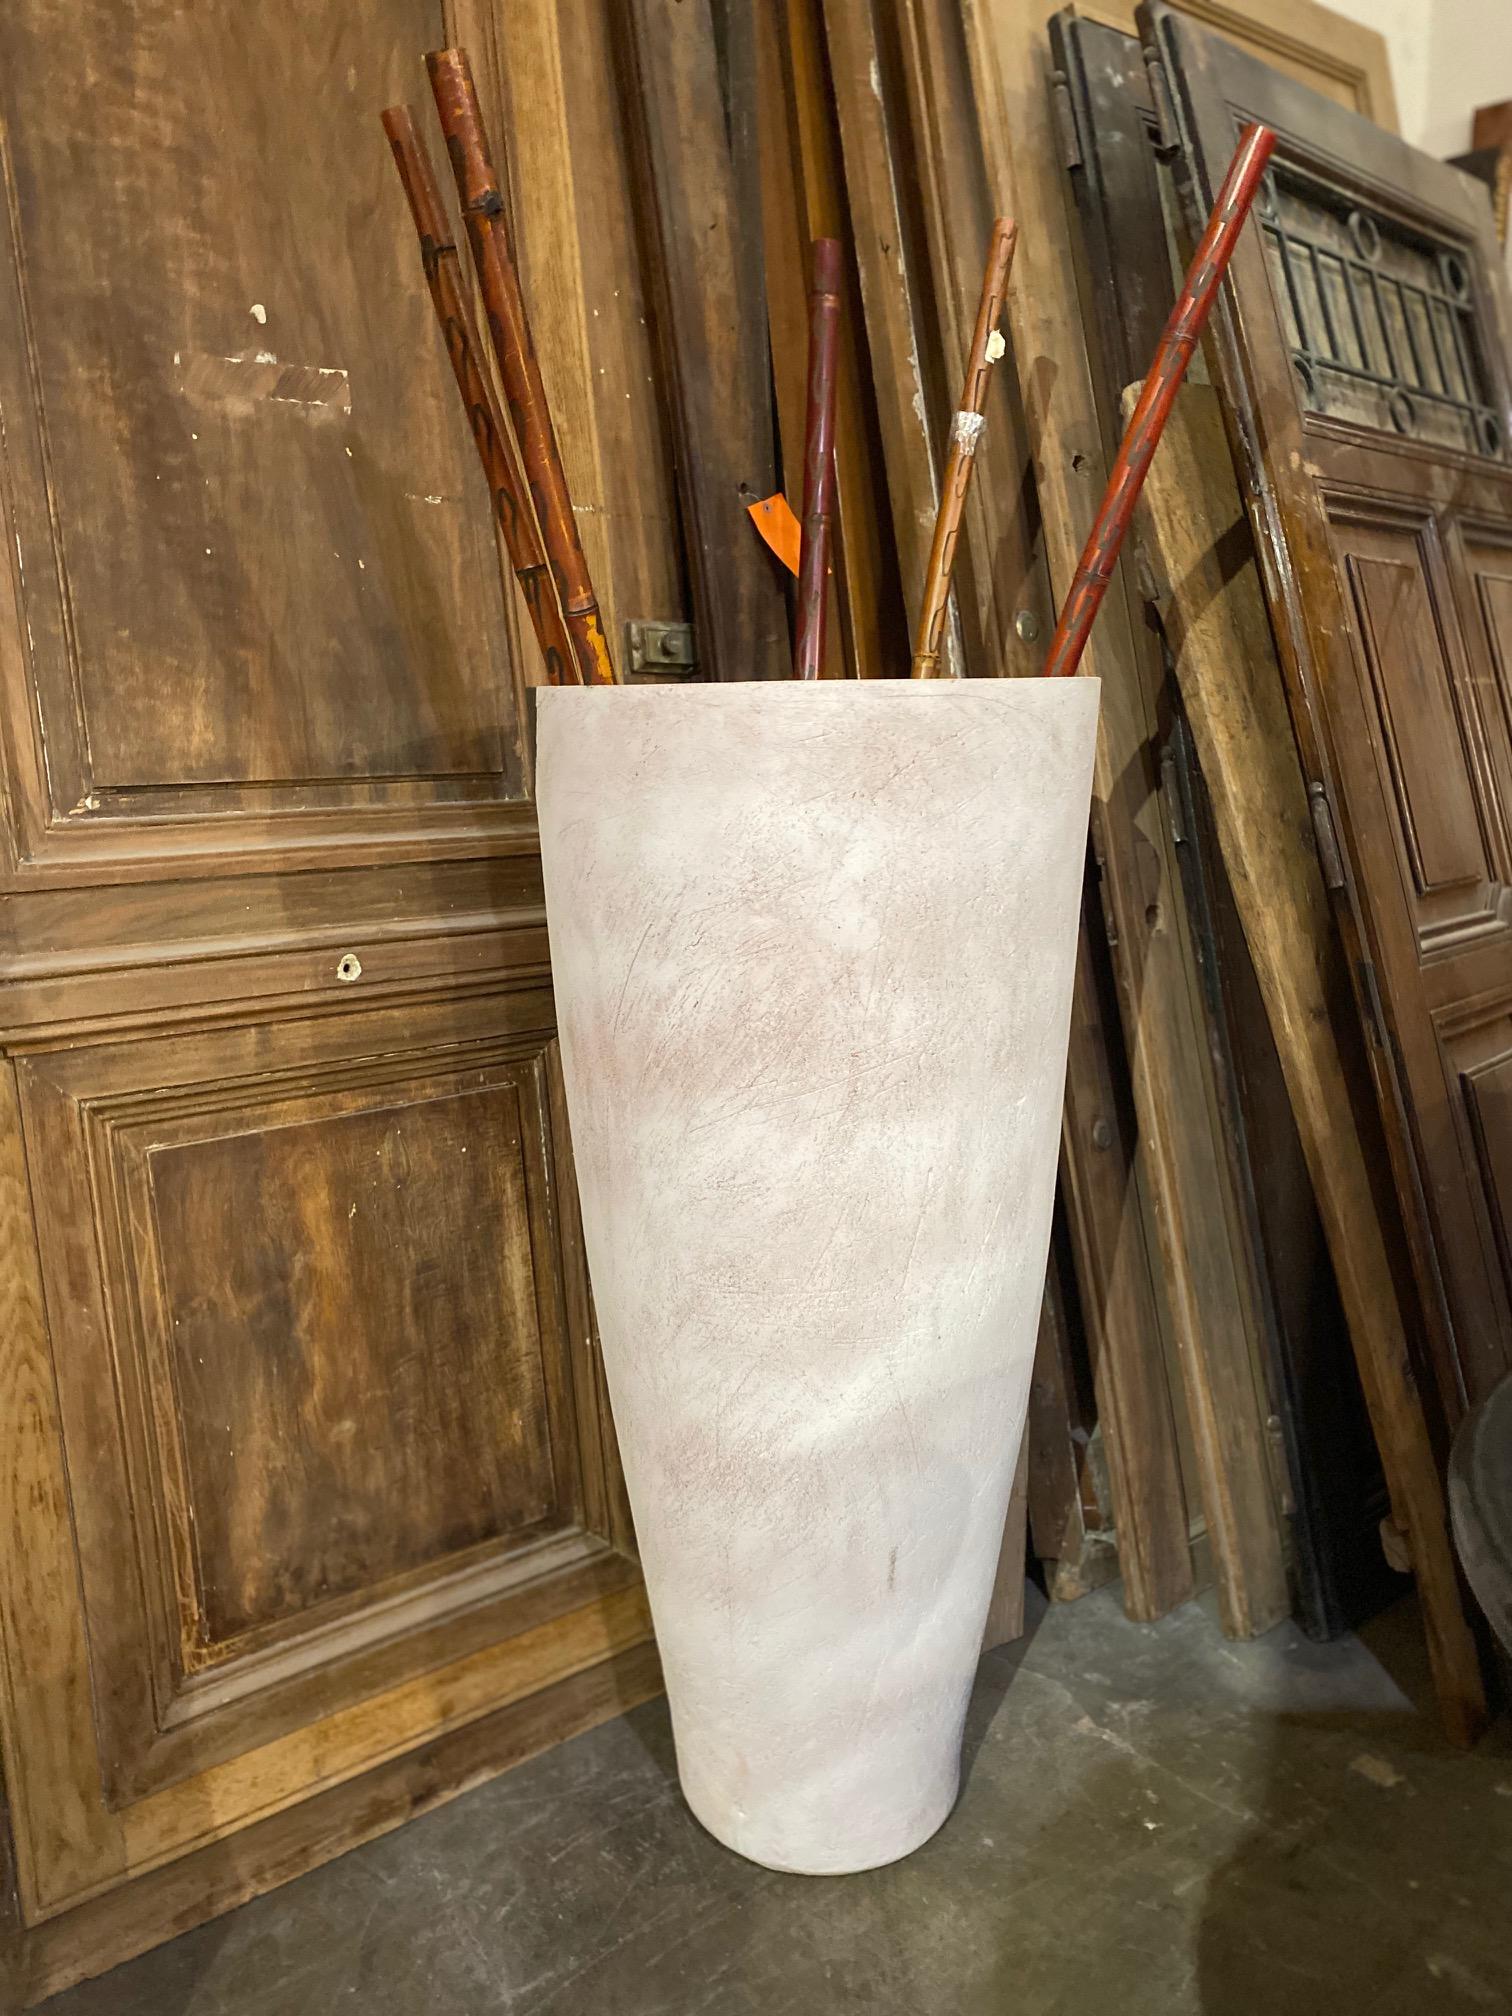 These handmade modern terracotta planters are so tall that they demand your attention! A great focal point for your courtyard.

Origin: France
 
Measurements: 51